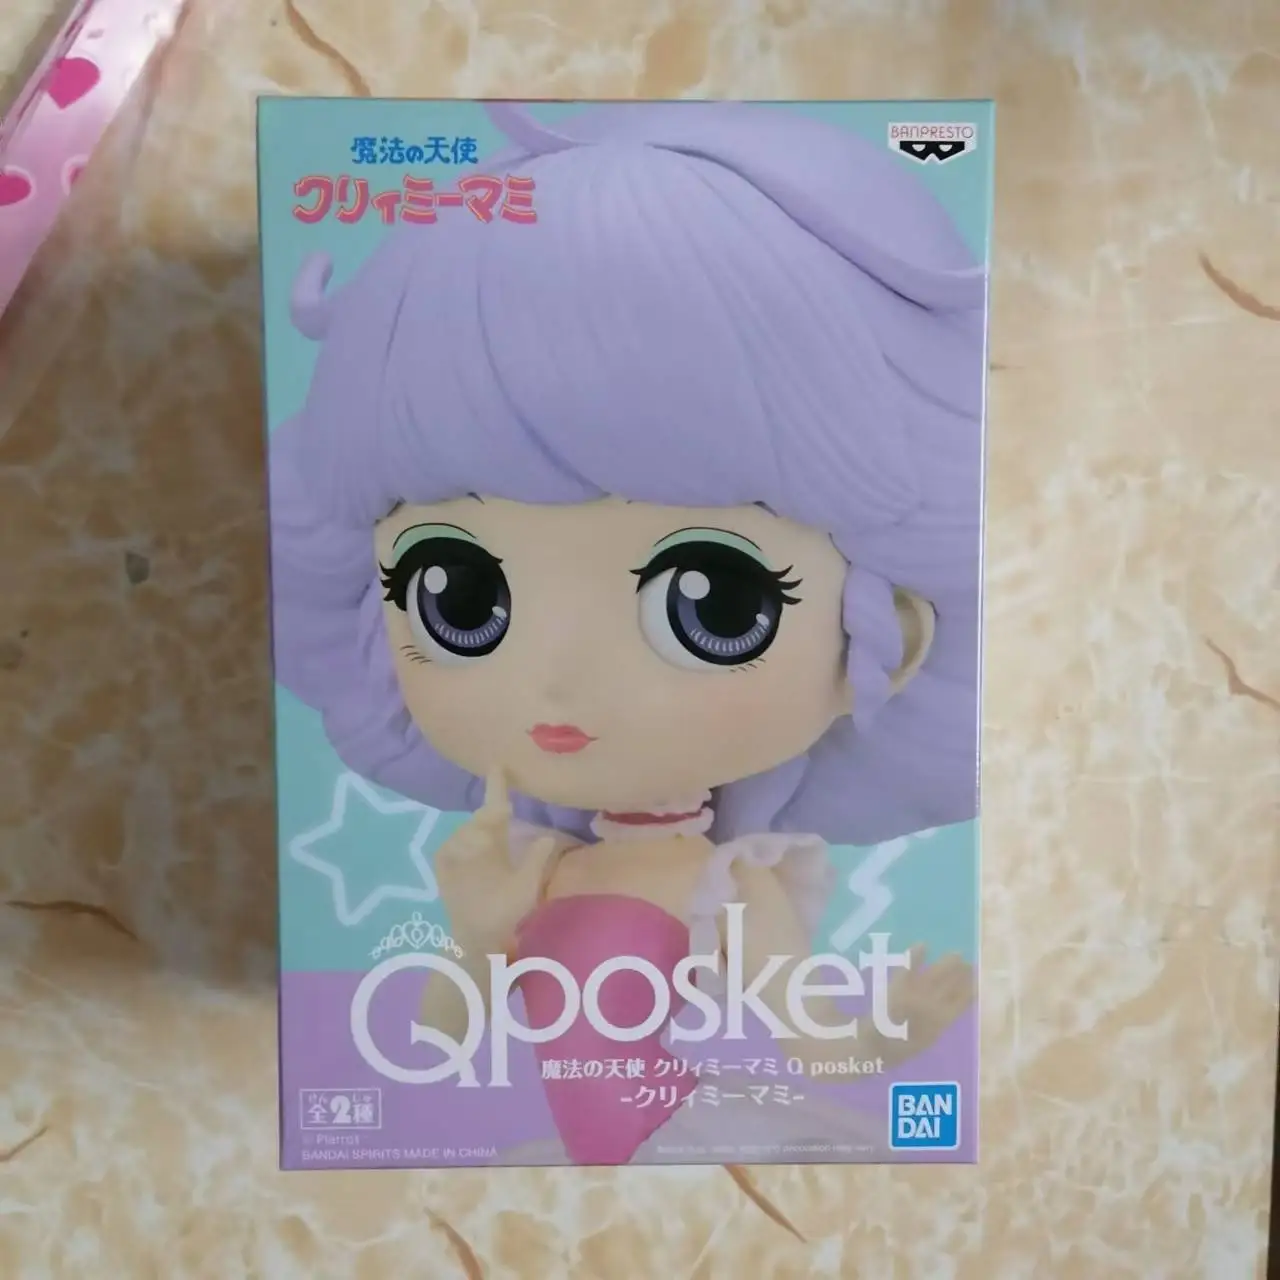 

New In Stock 100% Original Banpresto Qposket Magical Angel Creamy Mami Action Figure Boxed Model Collection Model Toys for Boys